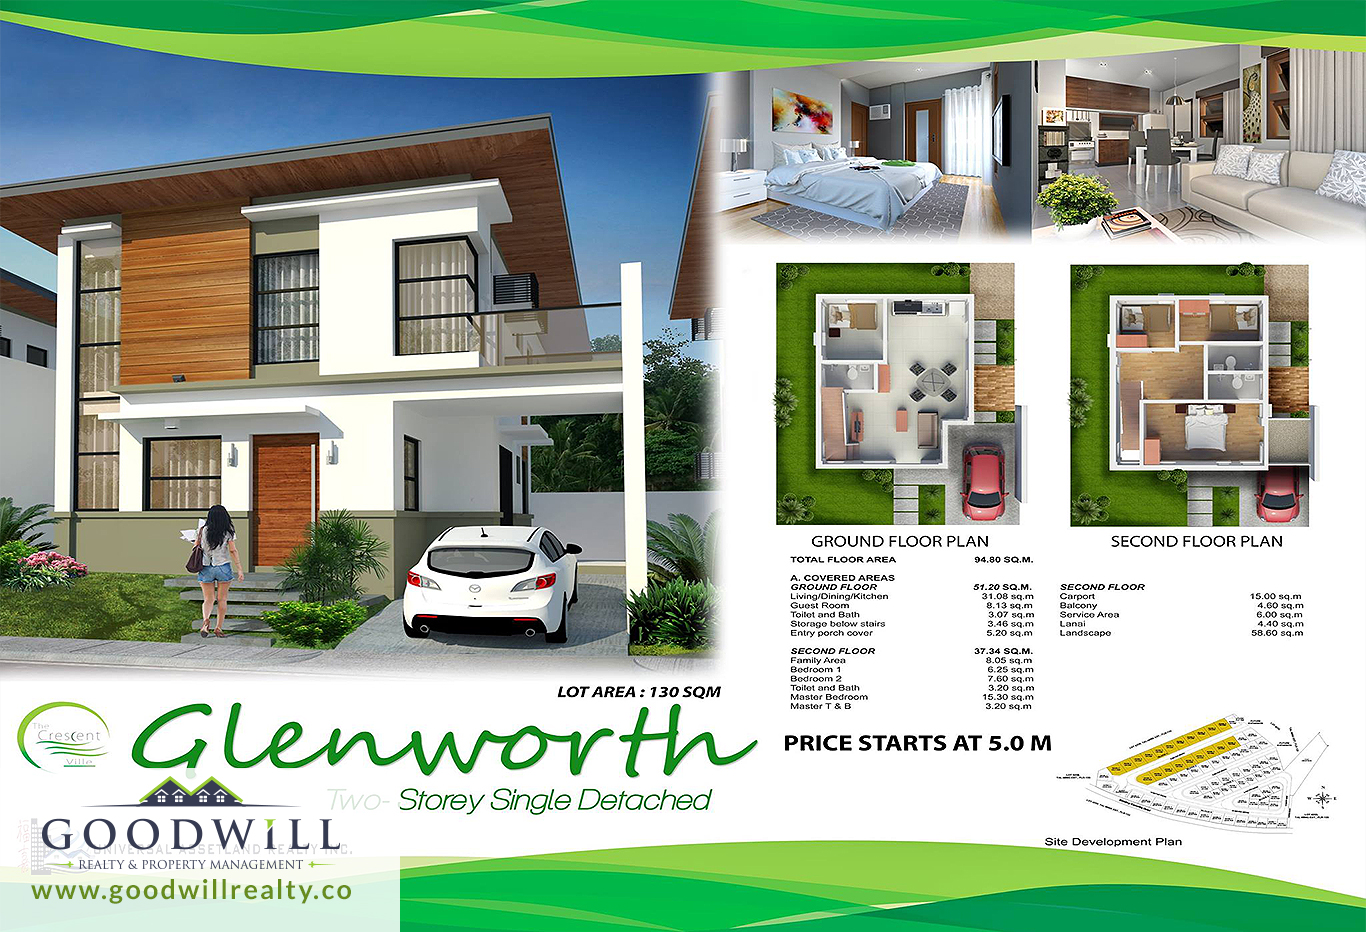 Glenworth At Crescent Ville Subdivision Goodwill Realty